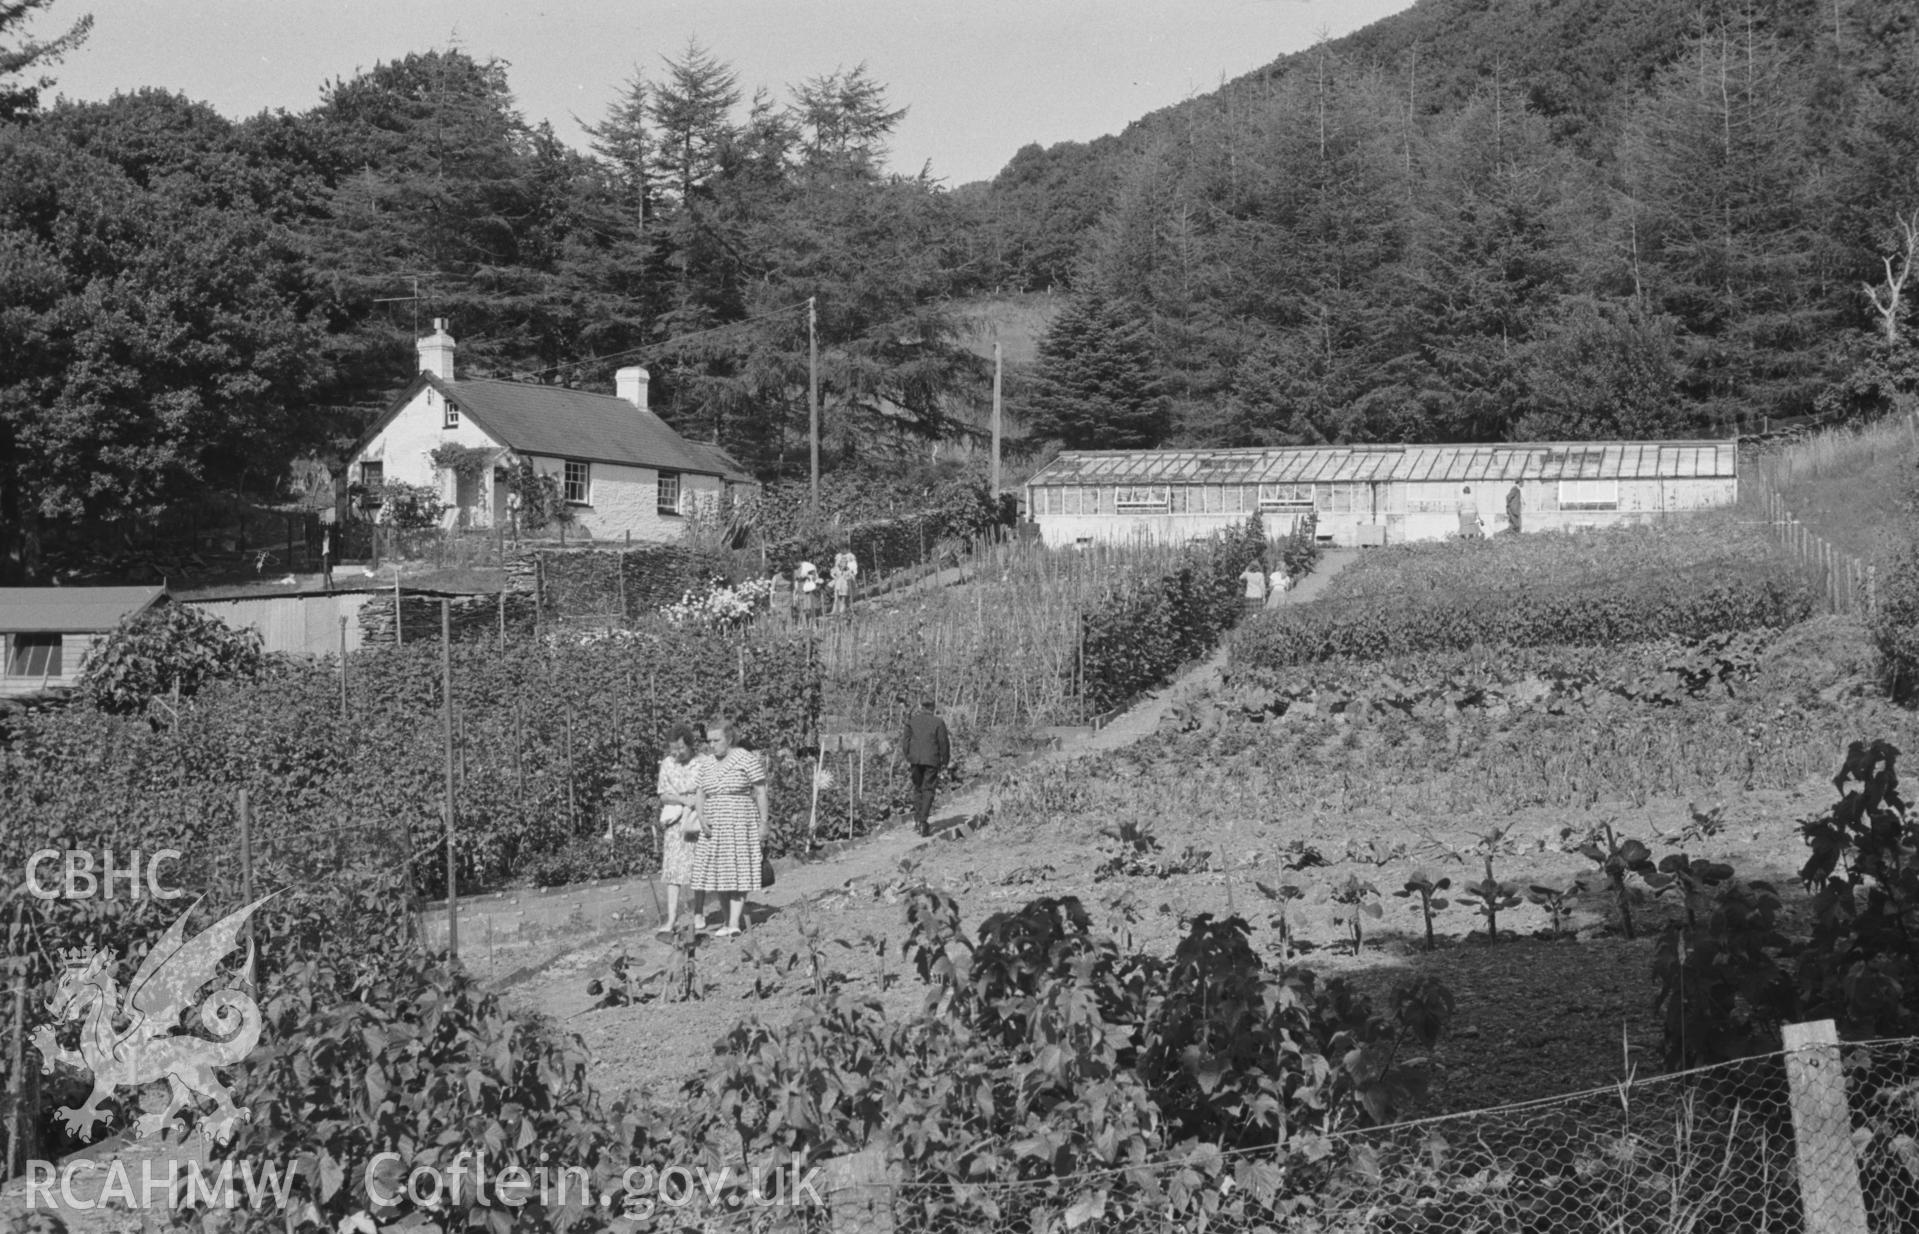 Digital copy of a black and white negative showing people and vegetable garden at Cymerau, Eglwysfach, near Machynlleth. Photographed by Arthur O. Chater in August 1965 from Grid Reference SN 6964 9637, looking north east.